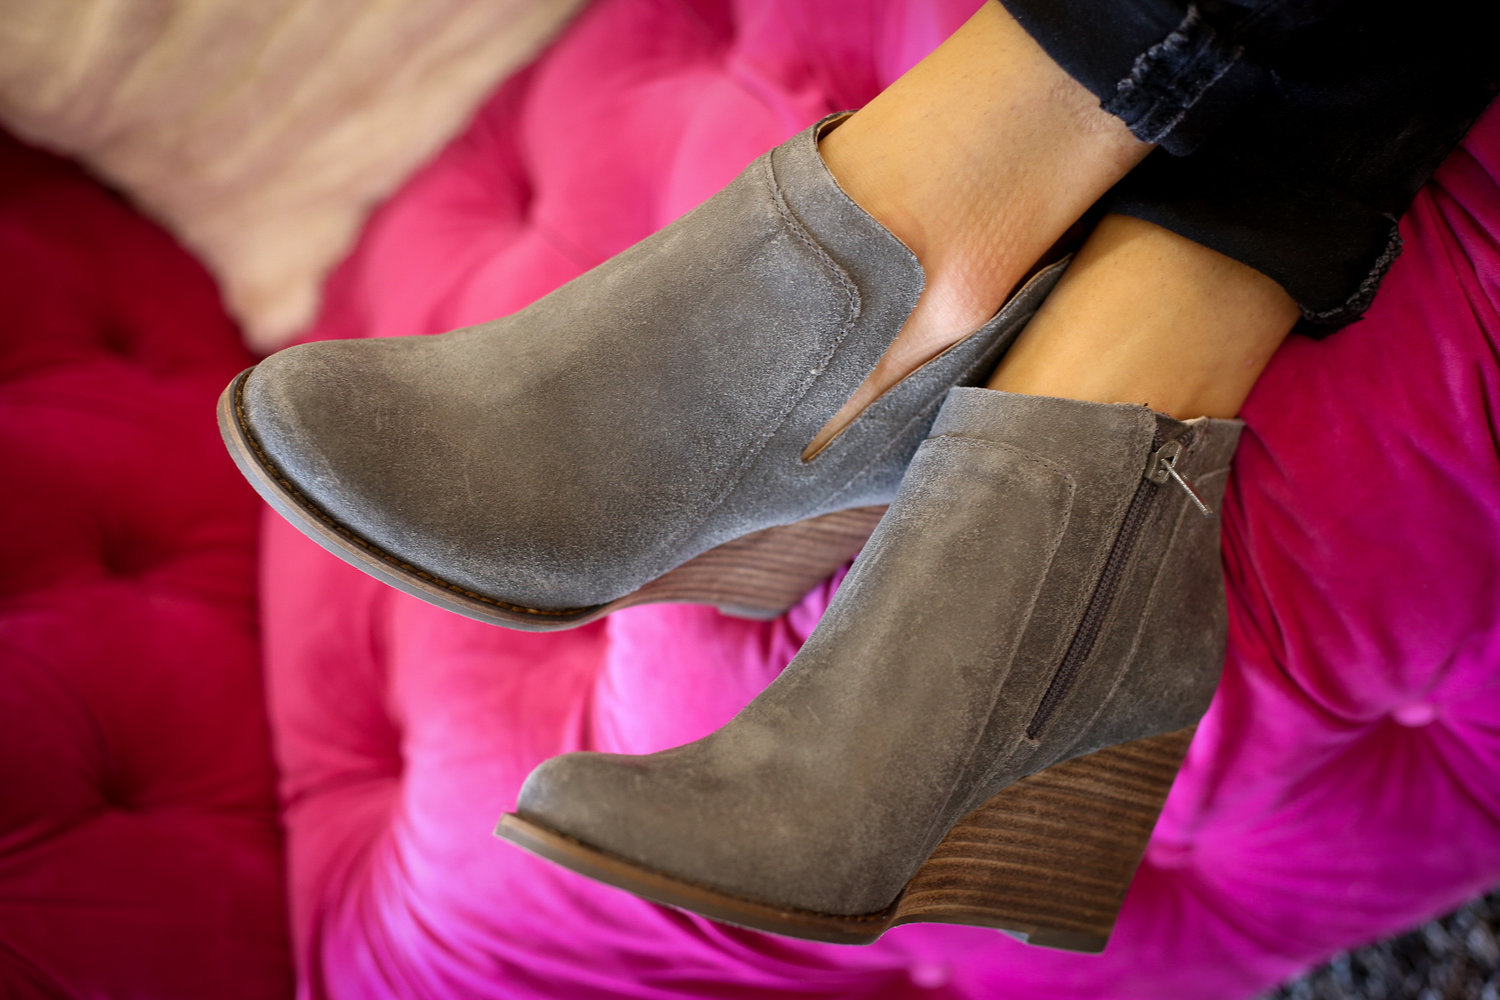 grey leather wedge boots